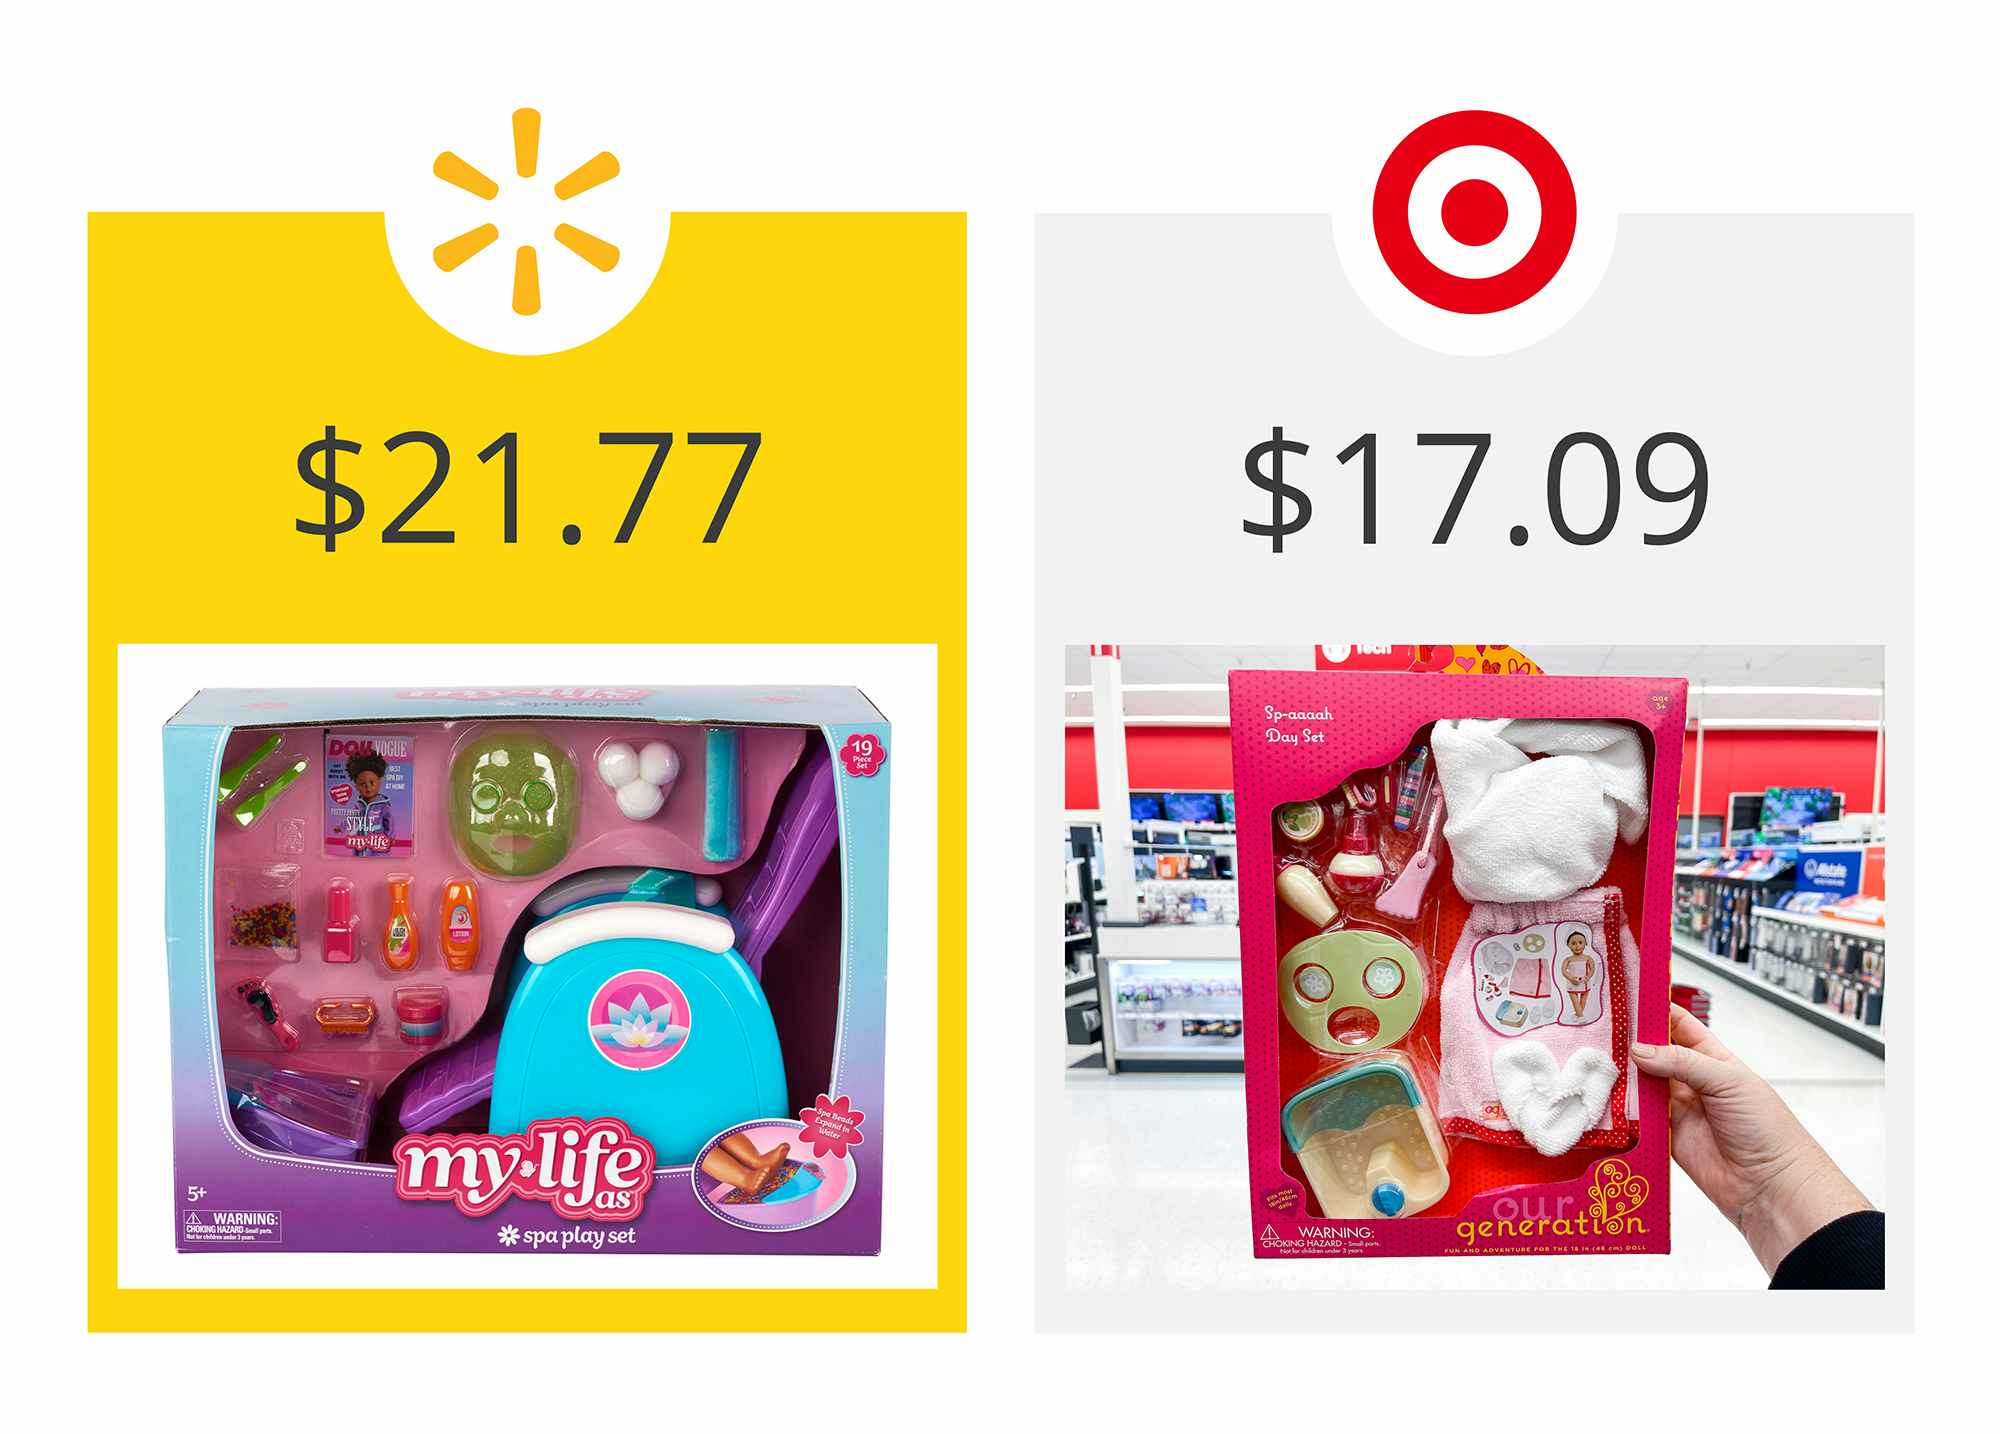 walmart as the winner on a graphic showing price comparison between target's our generation and walmart's my life as doll spa sets